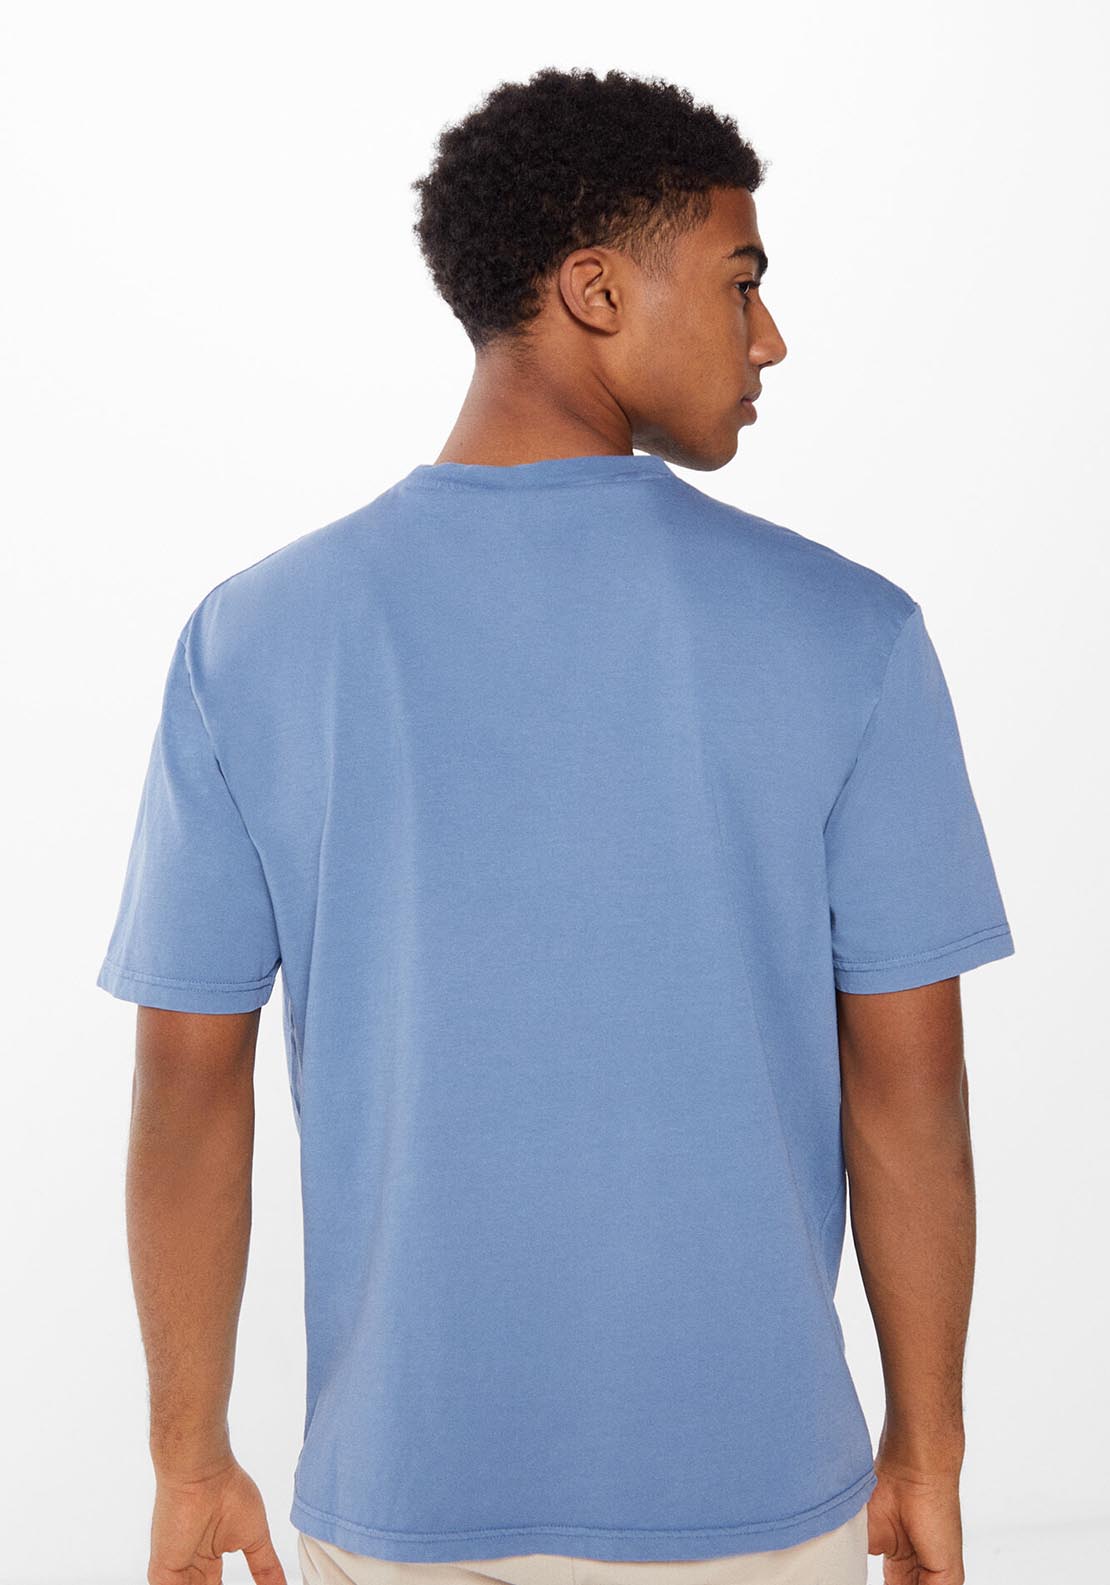 Springfield Washed T-shirt with logo - Blue 2 Shaws Department Stores